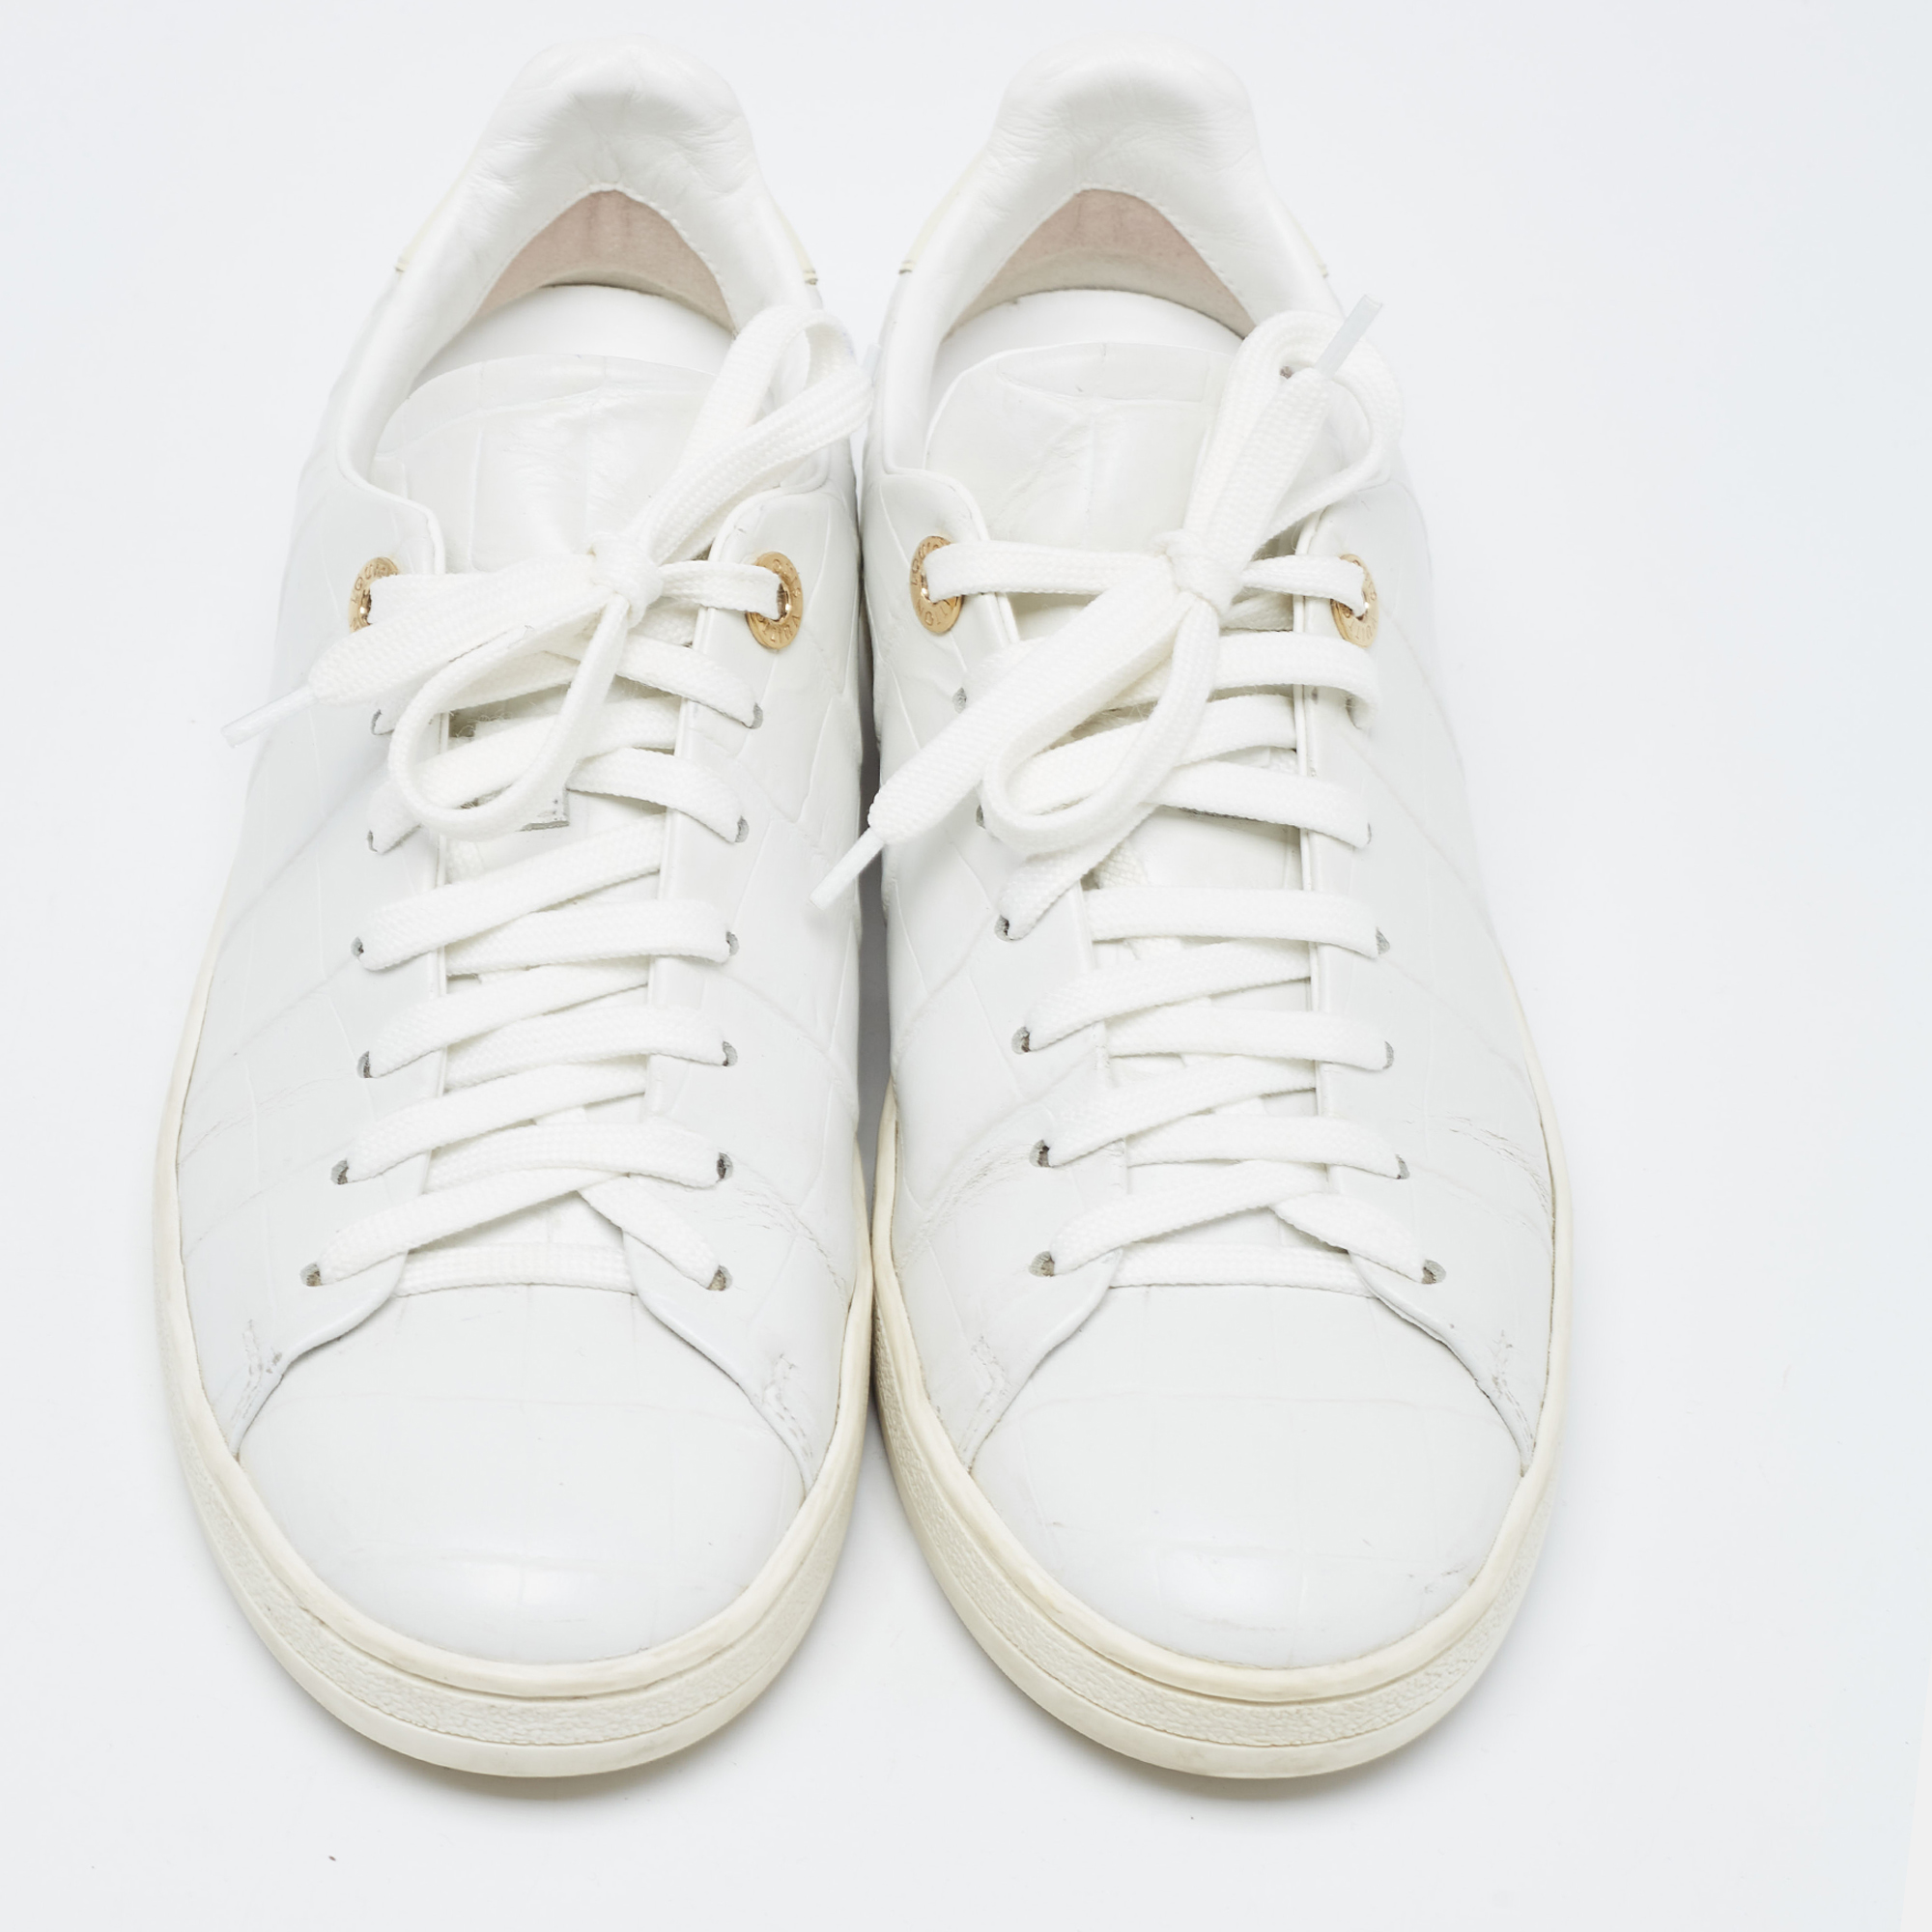 Louis Vuitton White Croc Embossed Leather Frontrow Sneakers Size 36.5